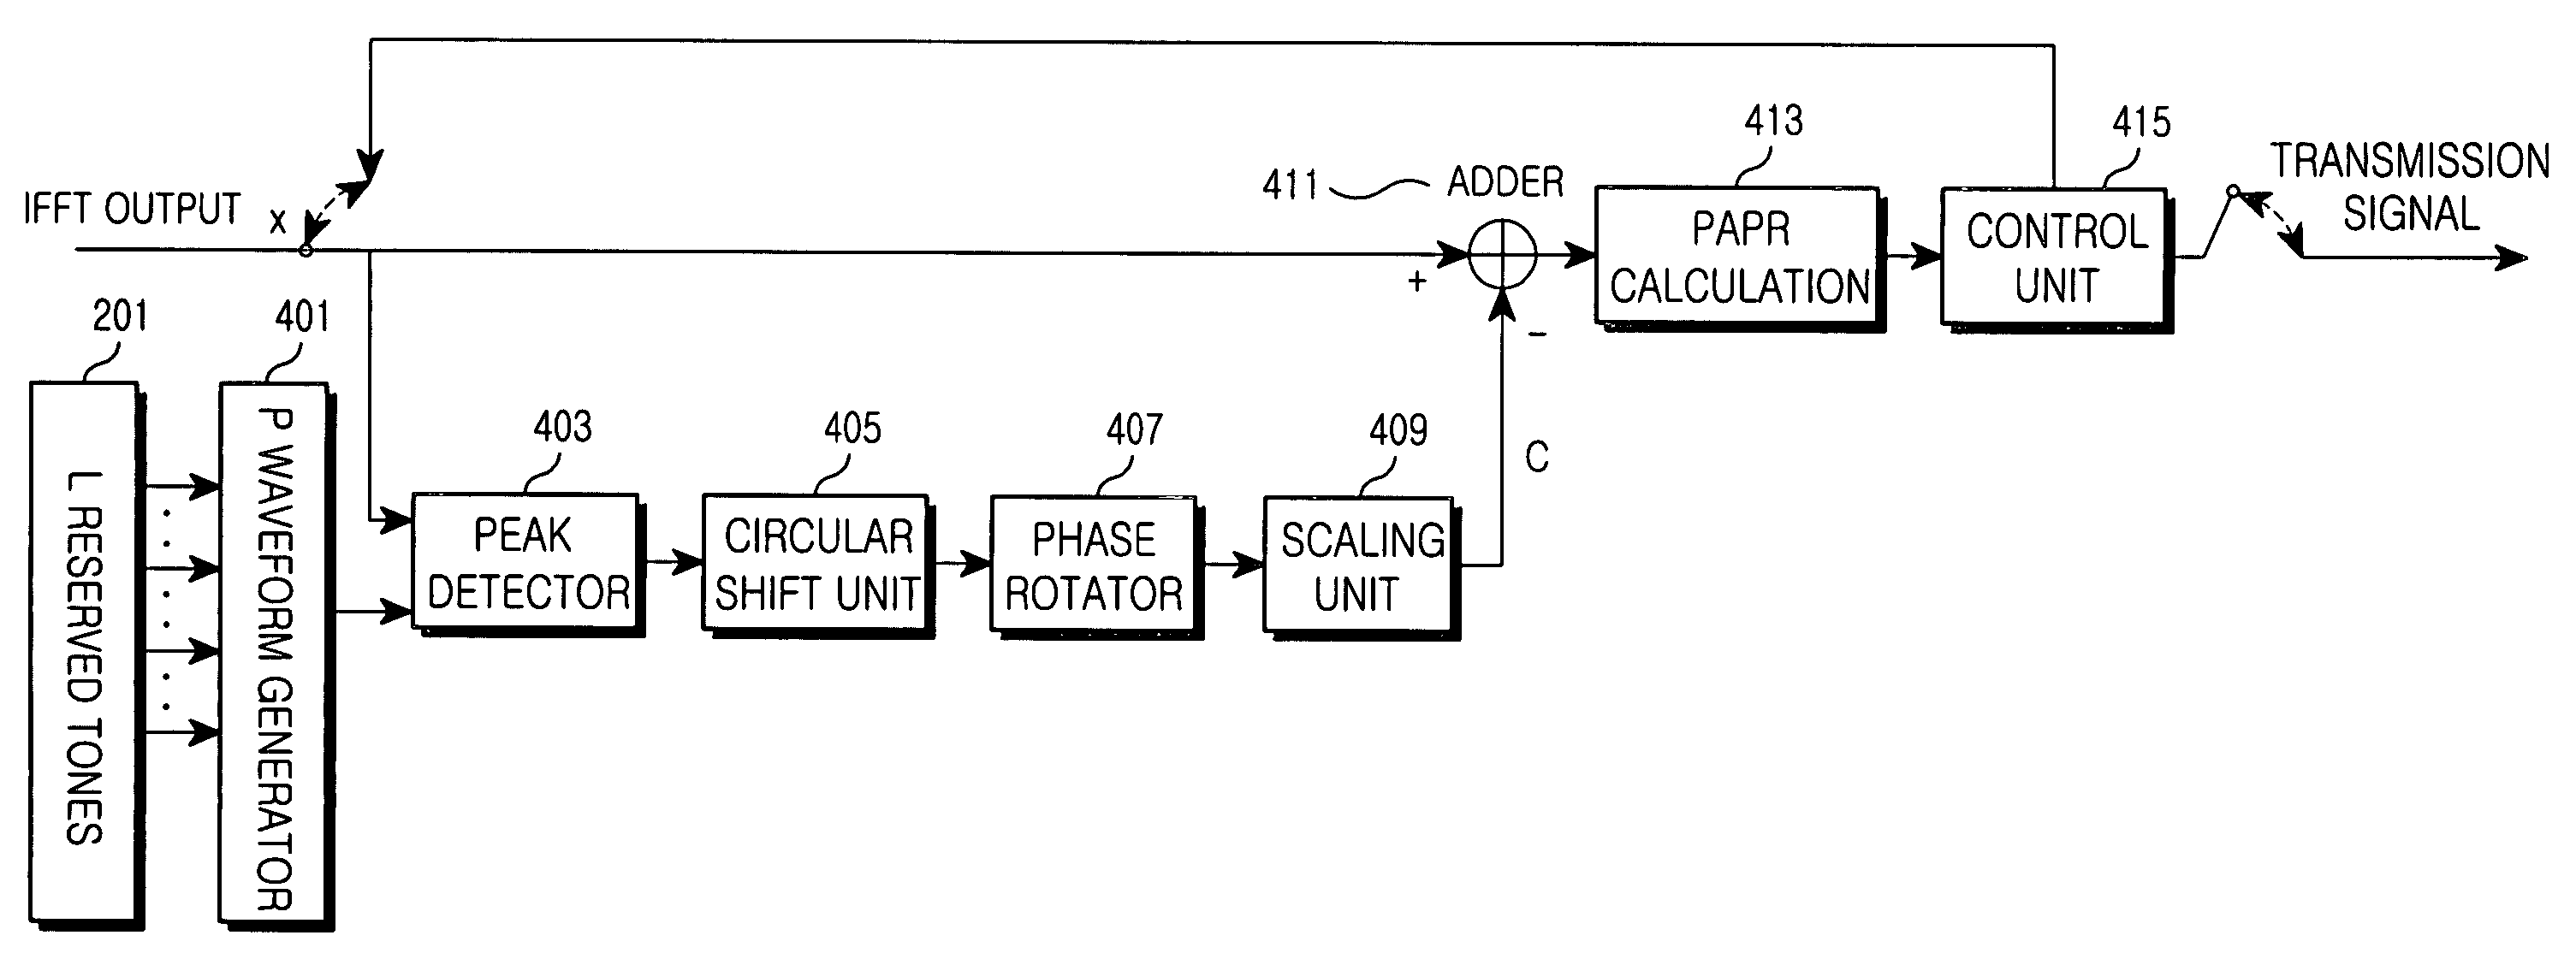 Apparatus and method for reducing PAPR in OFDM communication system